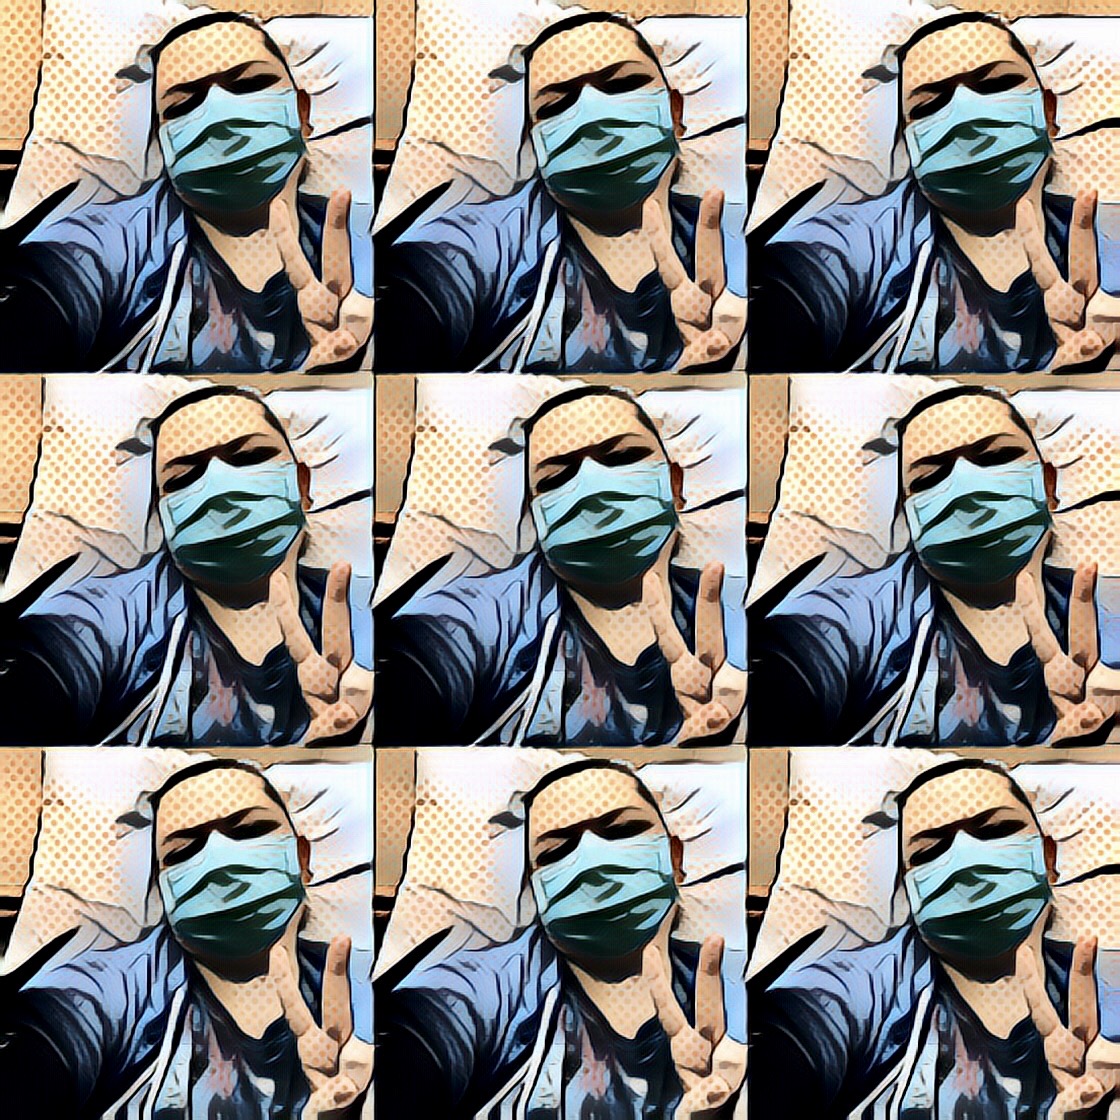 Digital art of a complication of selfie photographs with an individual in a mask holding up a peace sign while laying on a pillow.